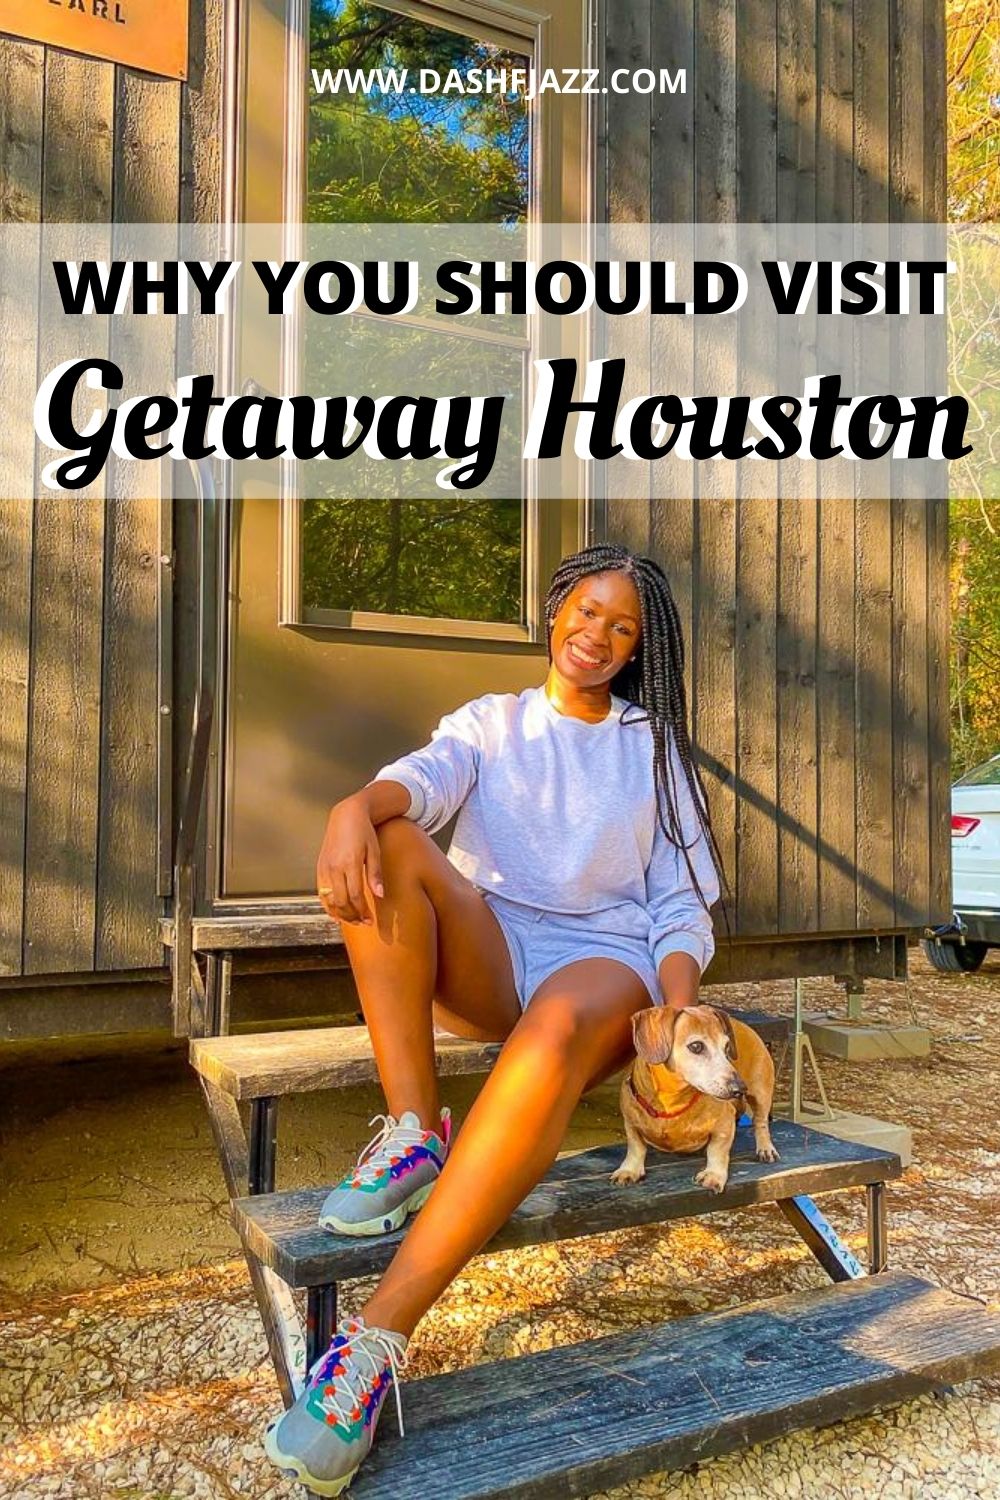 Jazzmine and JoJo sitting on steps of Getaway House cabin with text overlay "Why you should visit Getaway Houston"